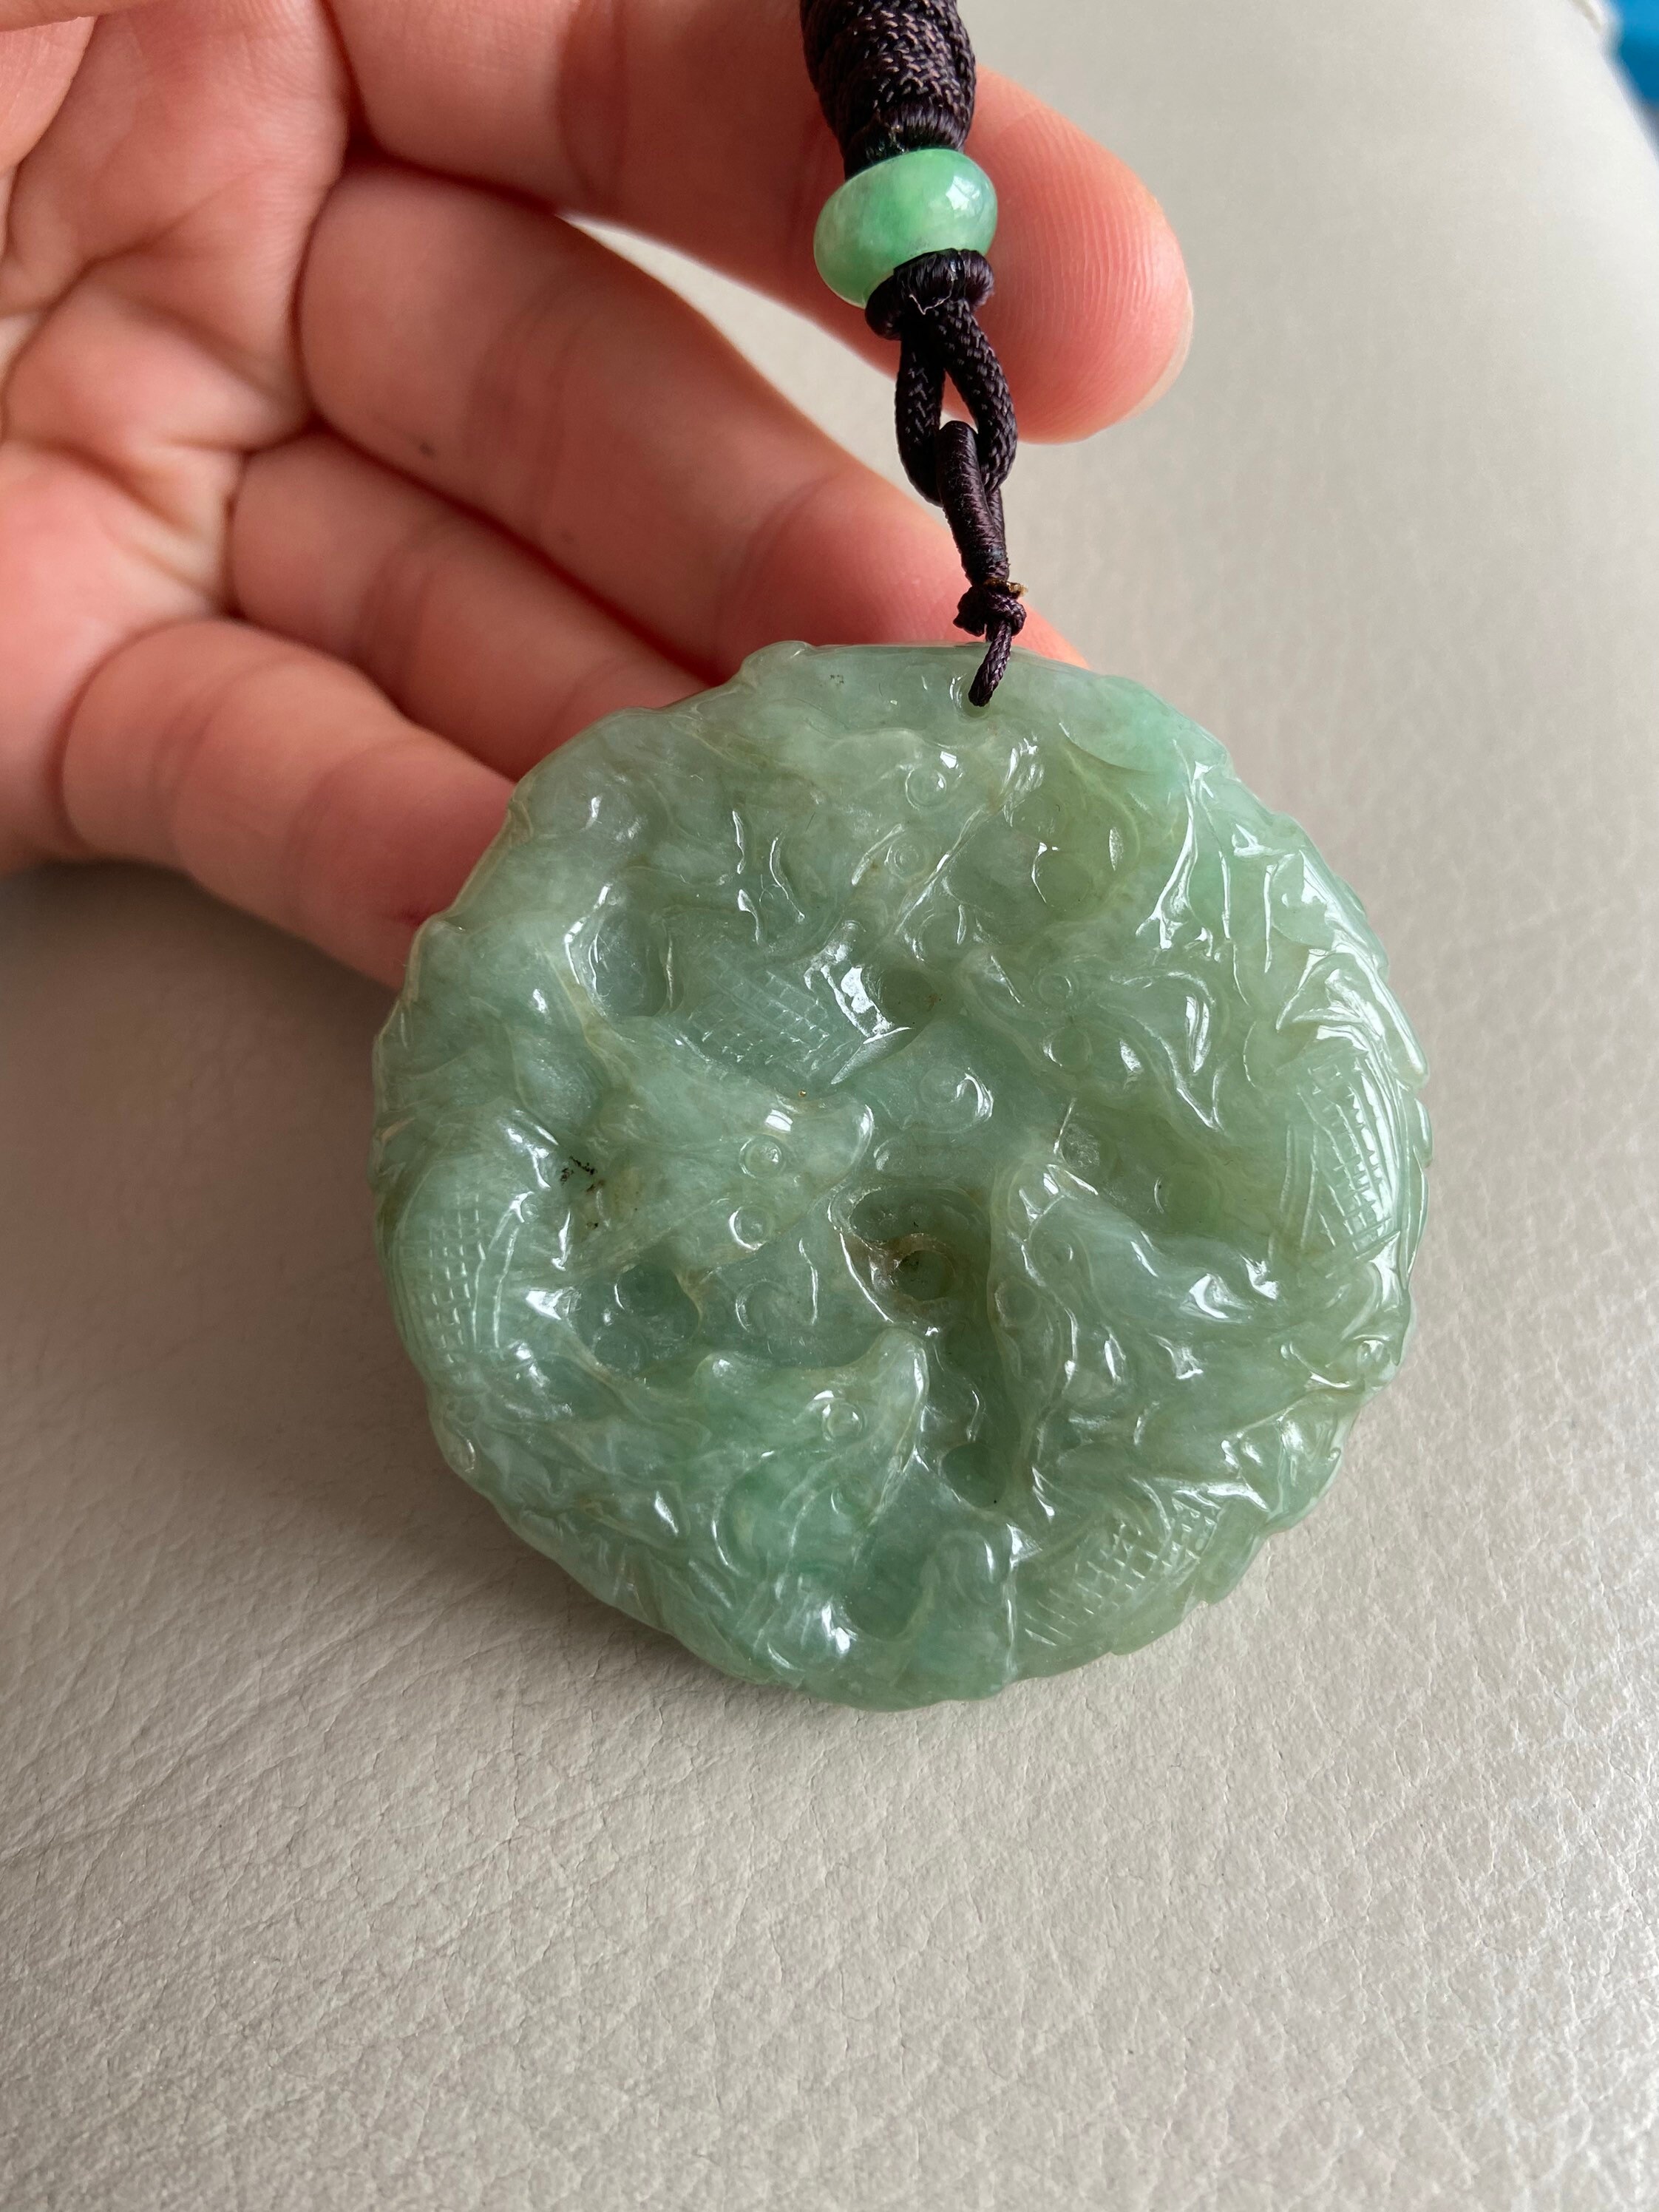 Chinese 9 Dragons Jadeite Pendant Round Shape in Green | Etsy